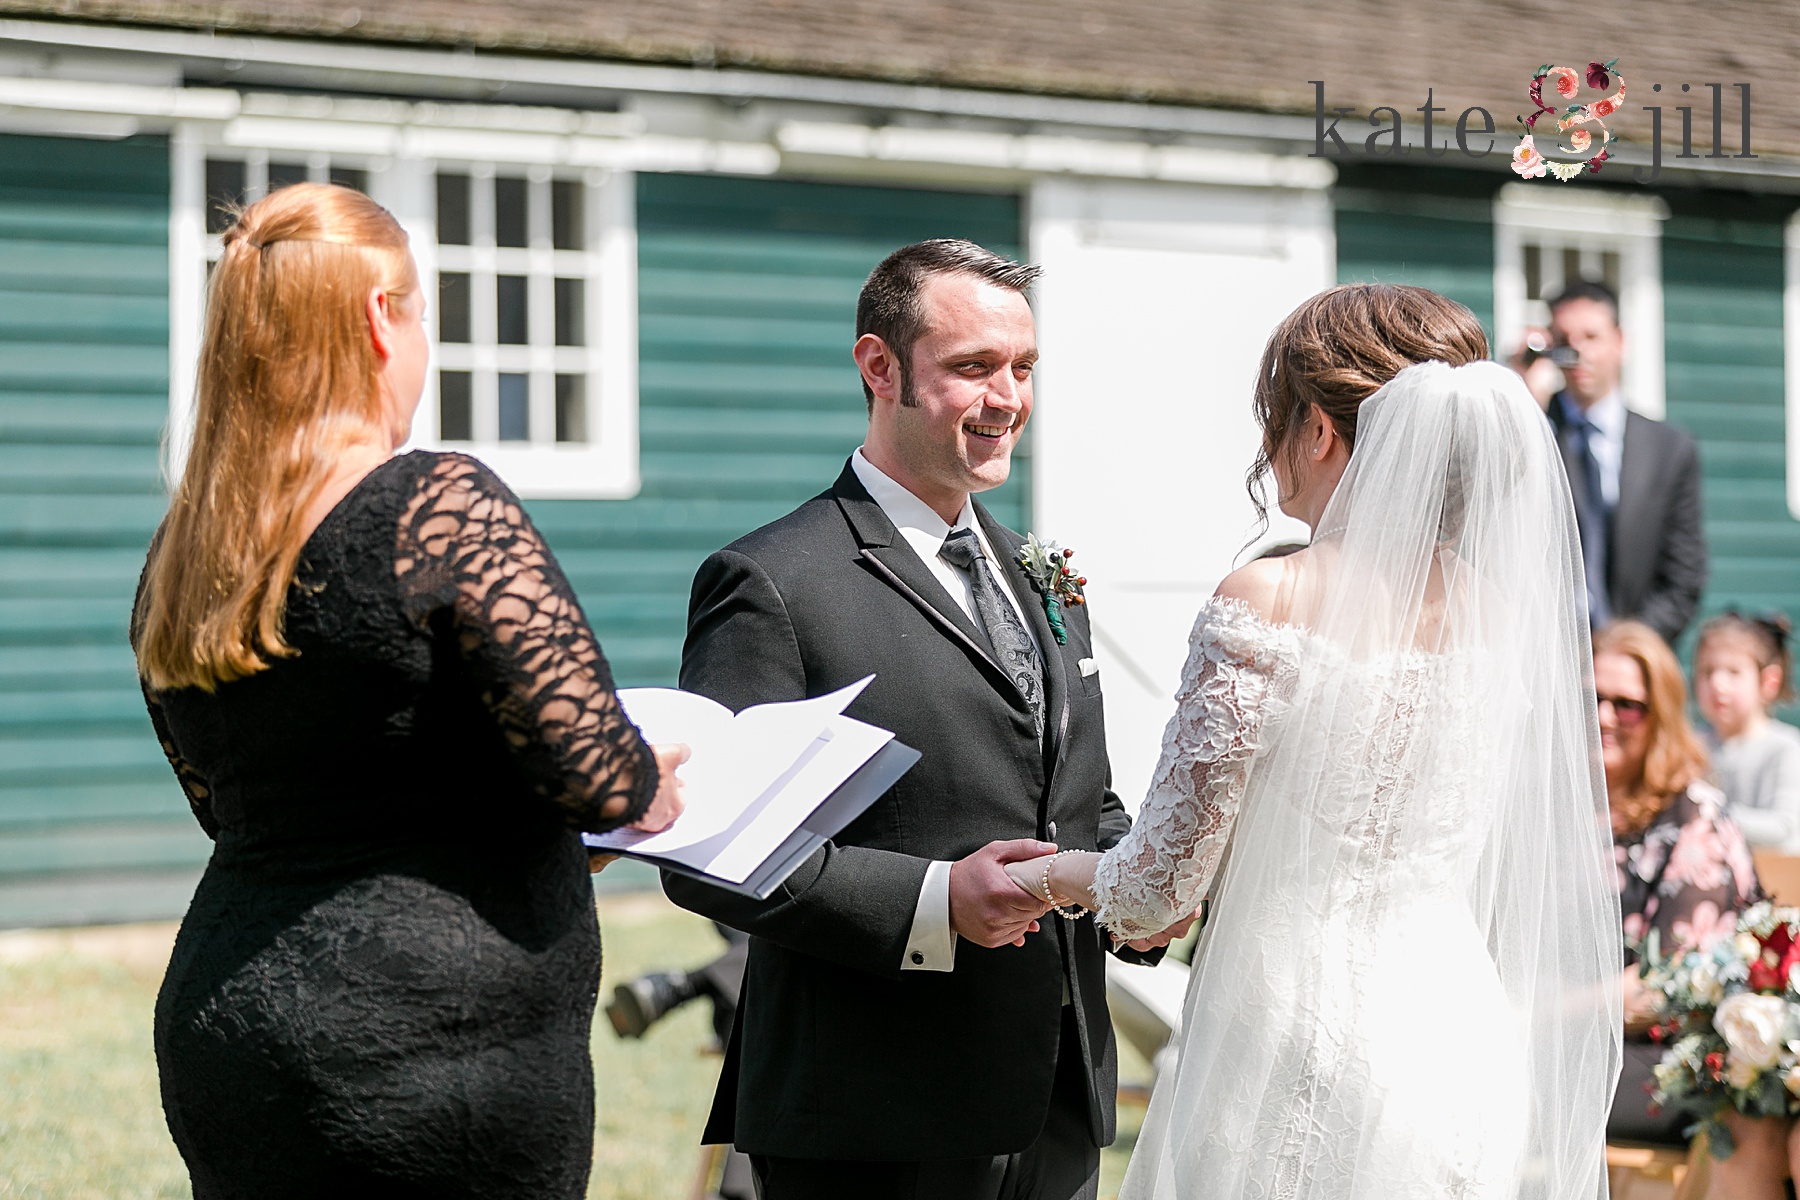 exchanging vows during ceremony